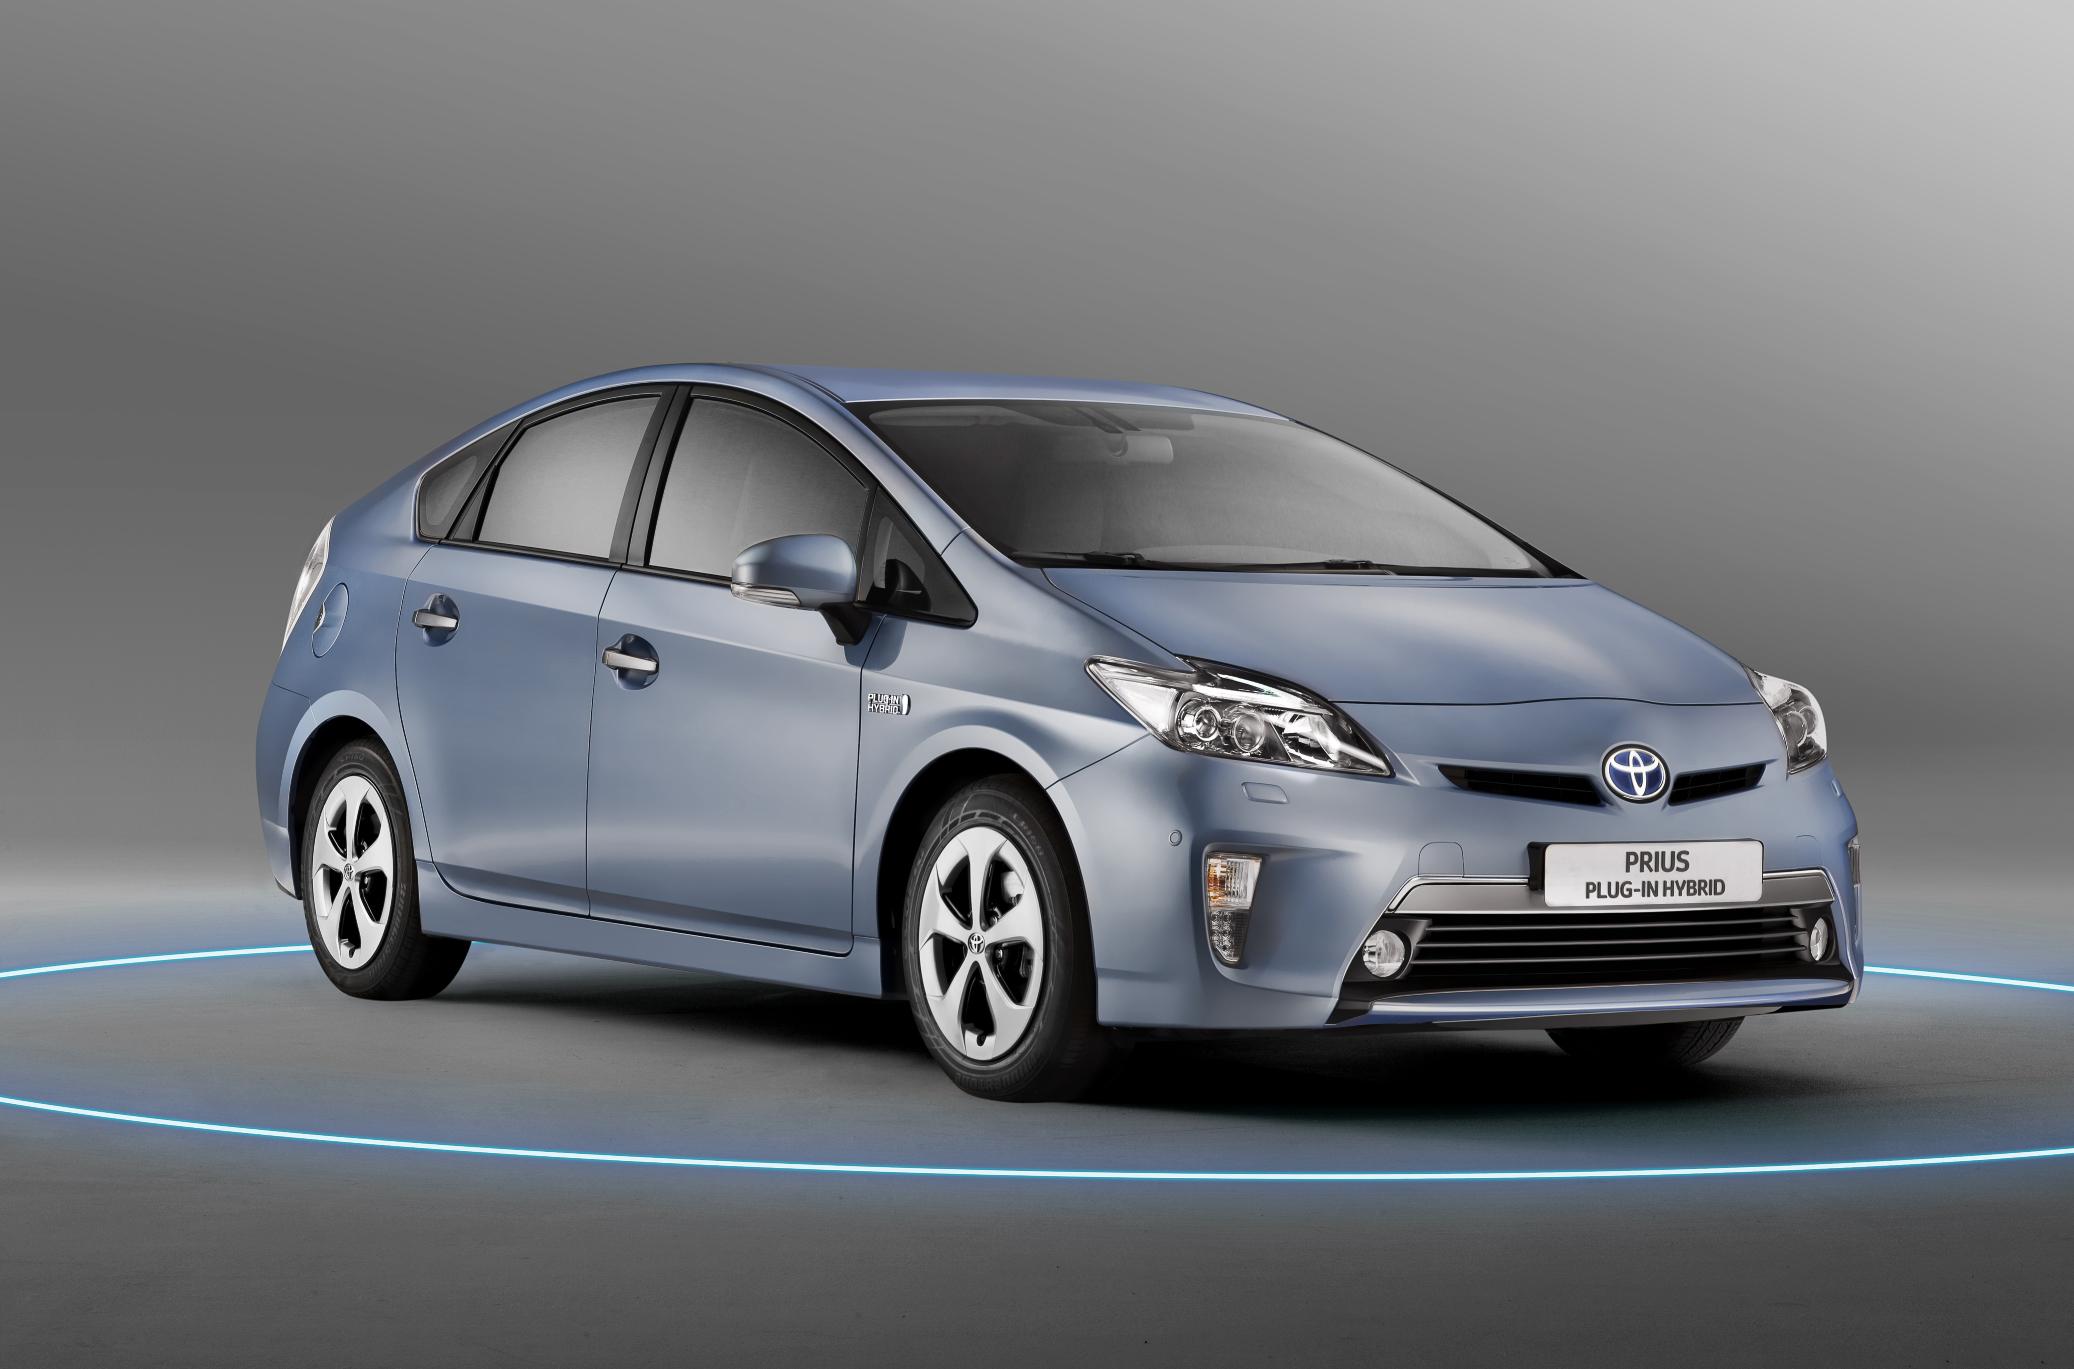 2012 Toyota Prius Plug-In Hybrid with the lowest CO2 emissions on the market